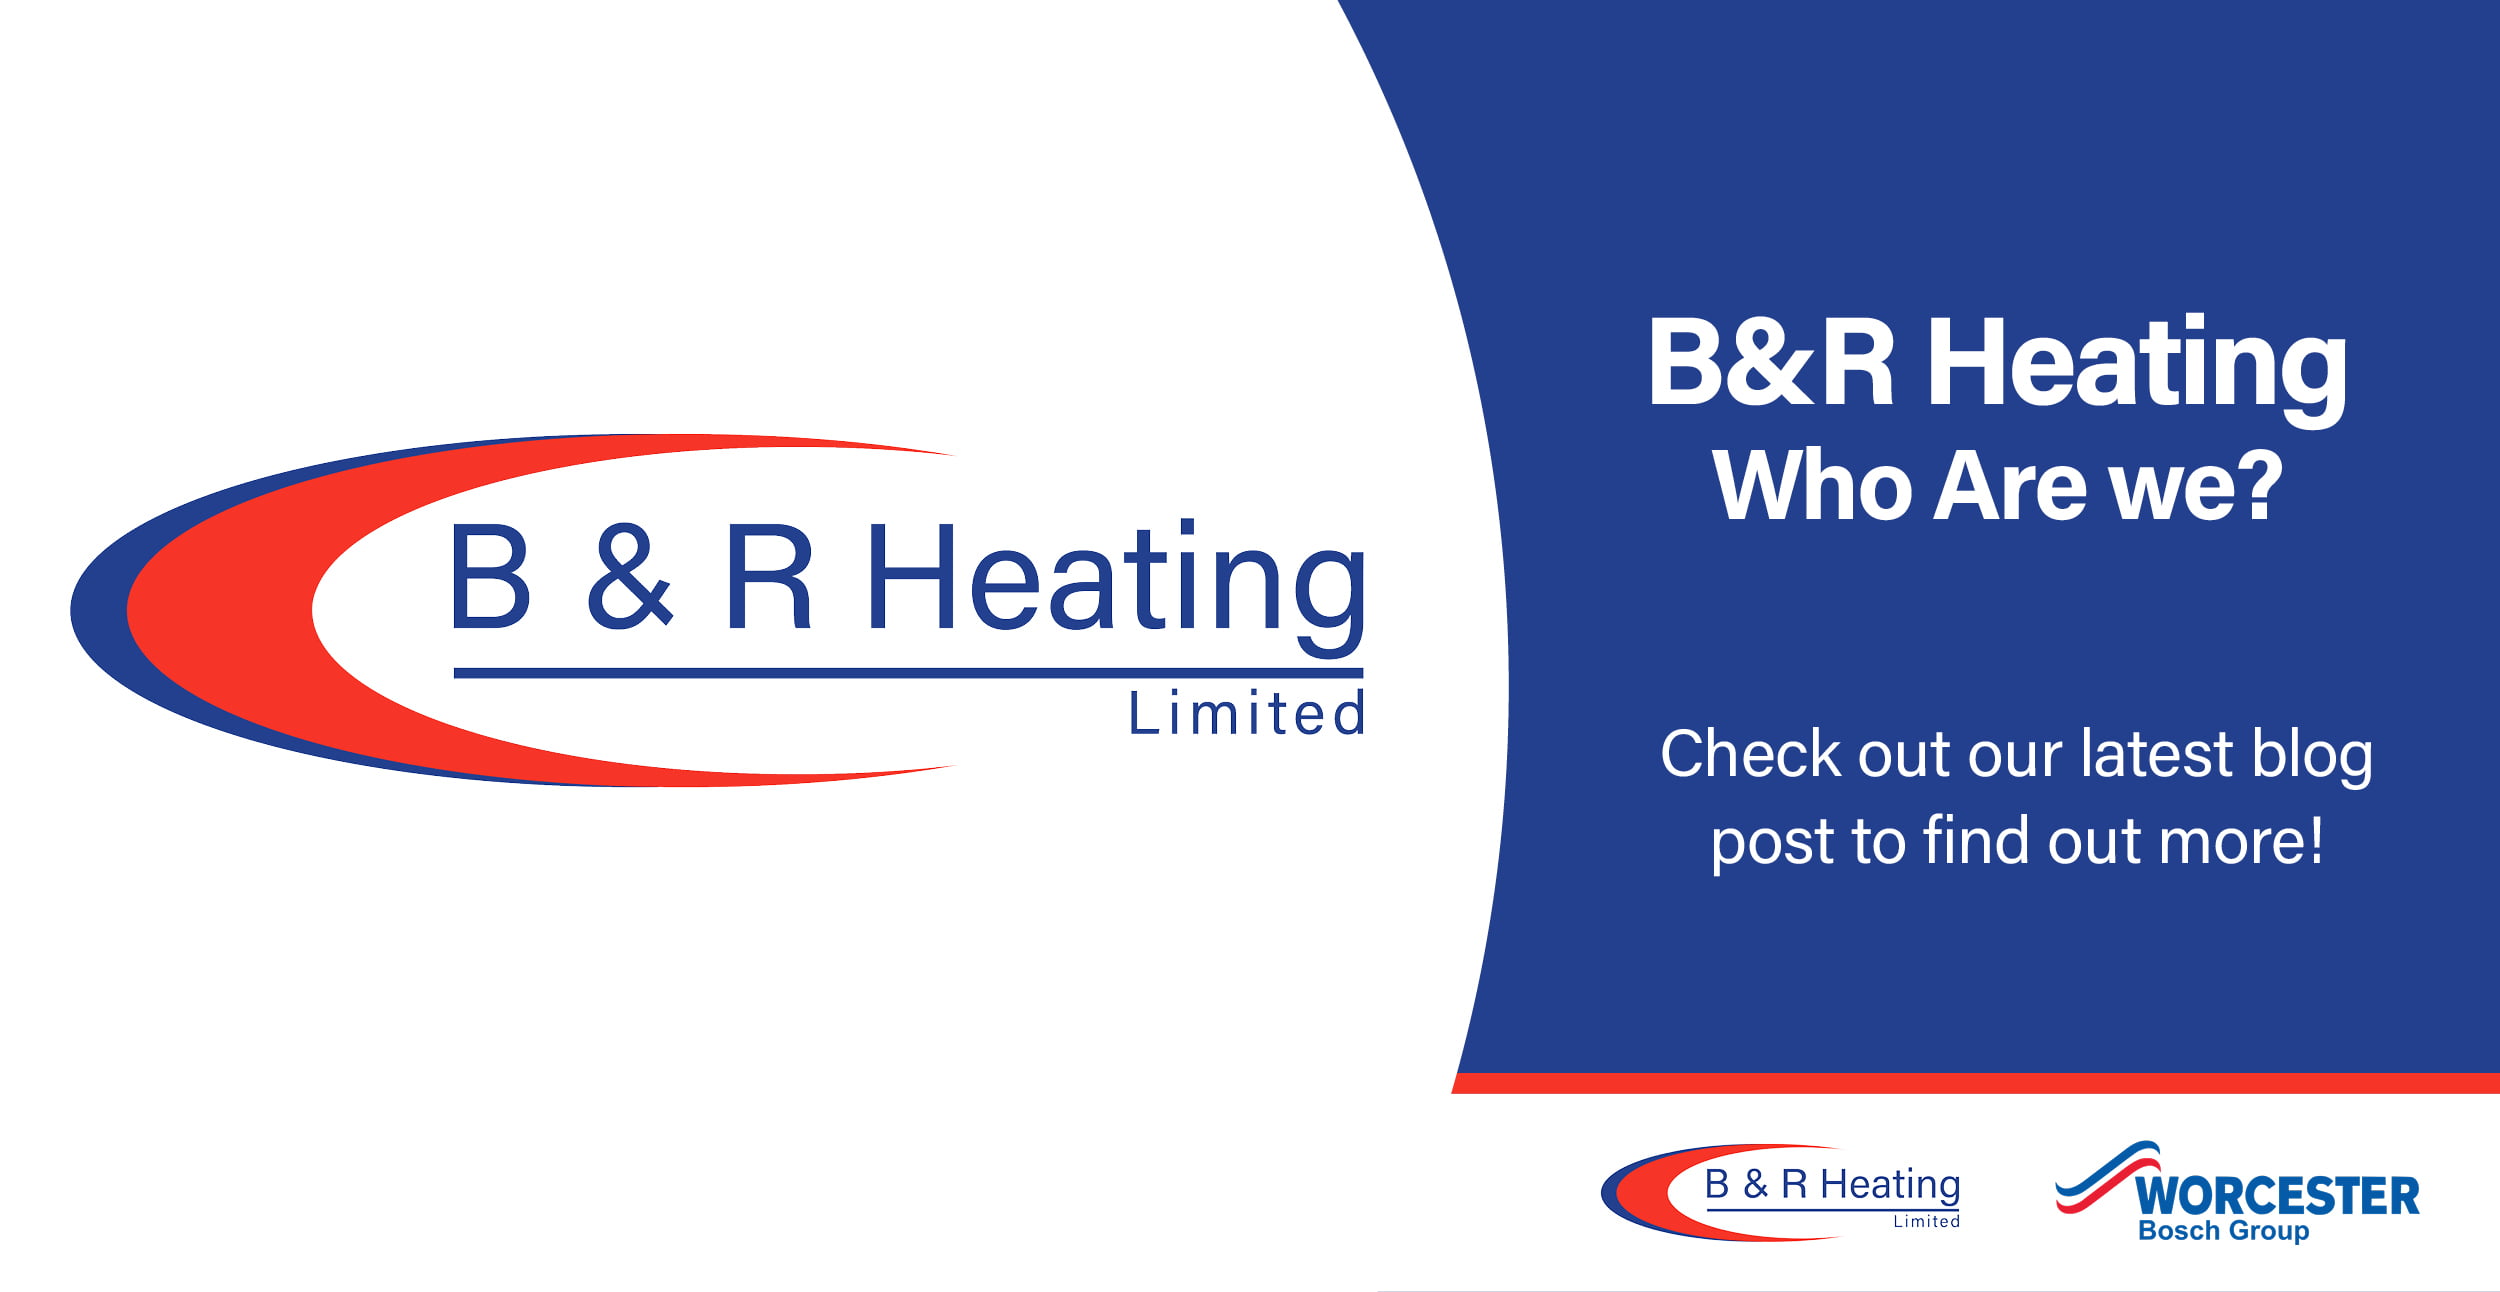 Who are we blog post by B&R Heating Ltd